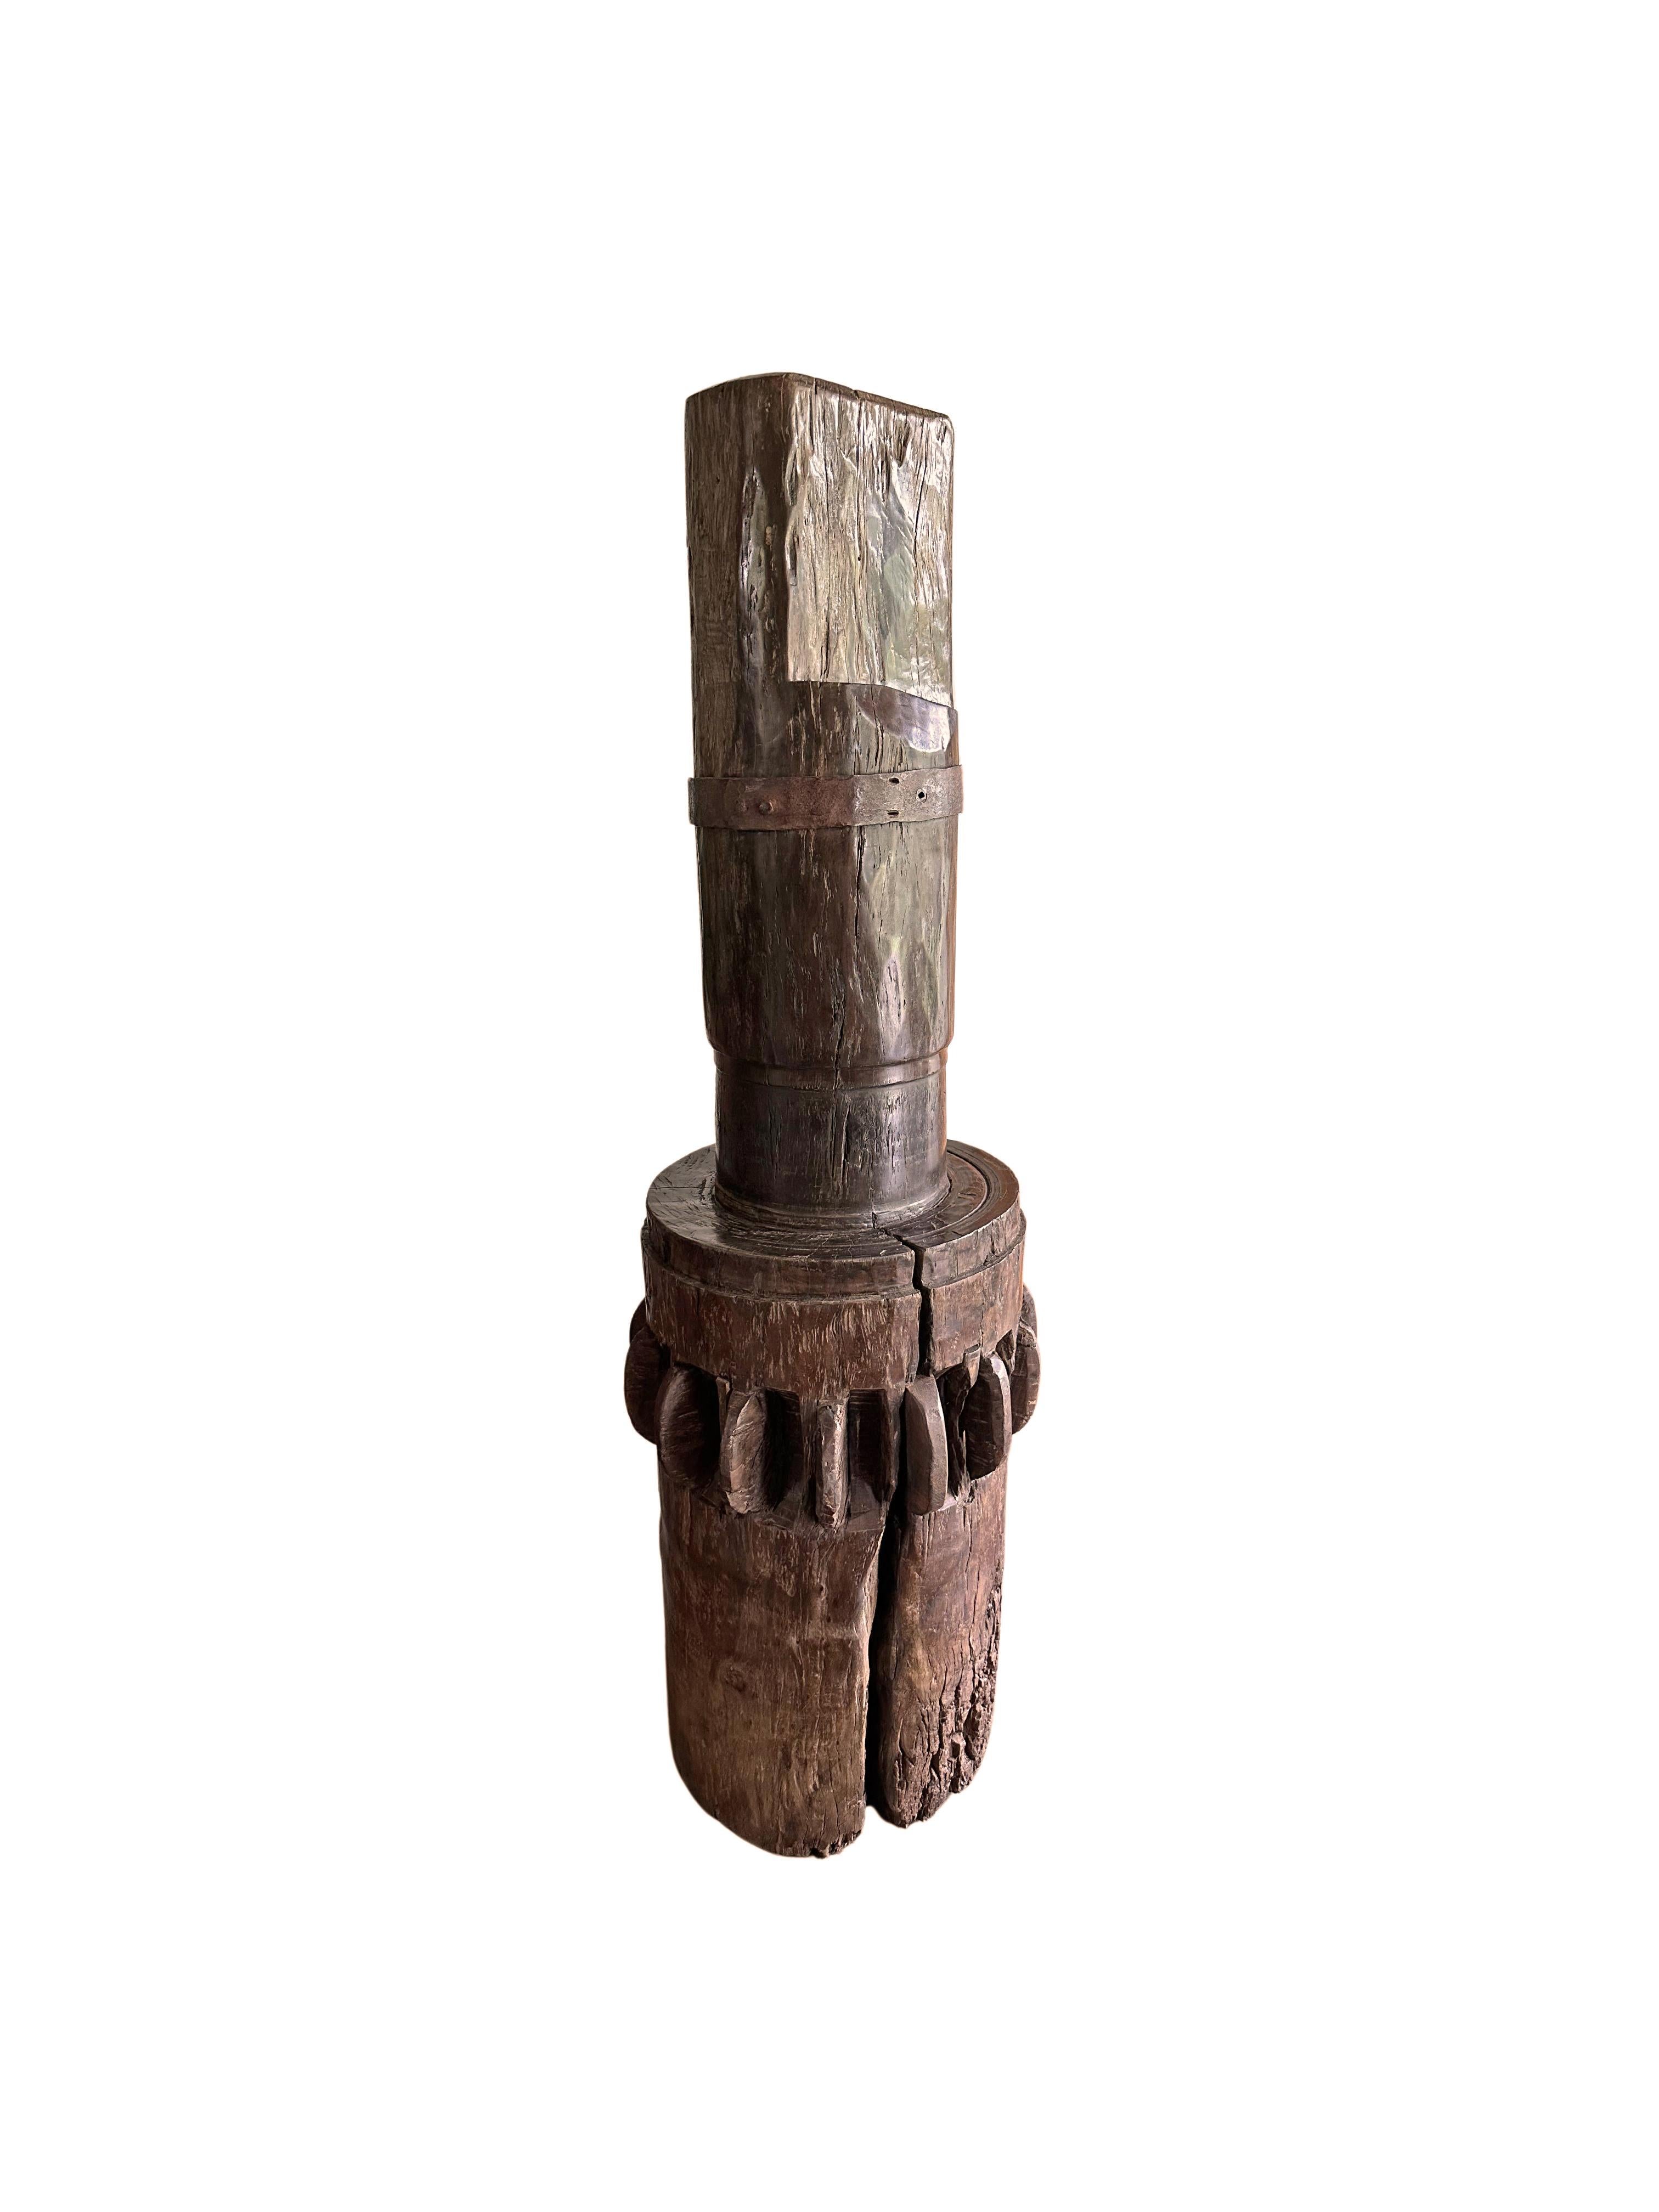 Other Solid Teak Sugar Cane Mill Crusher / Grinder from Java, Indonesia, c. 1900 For Sale